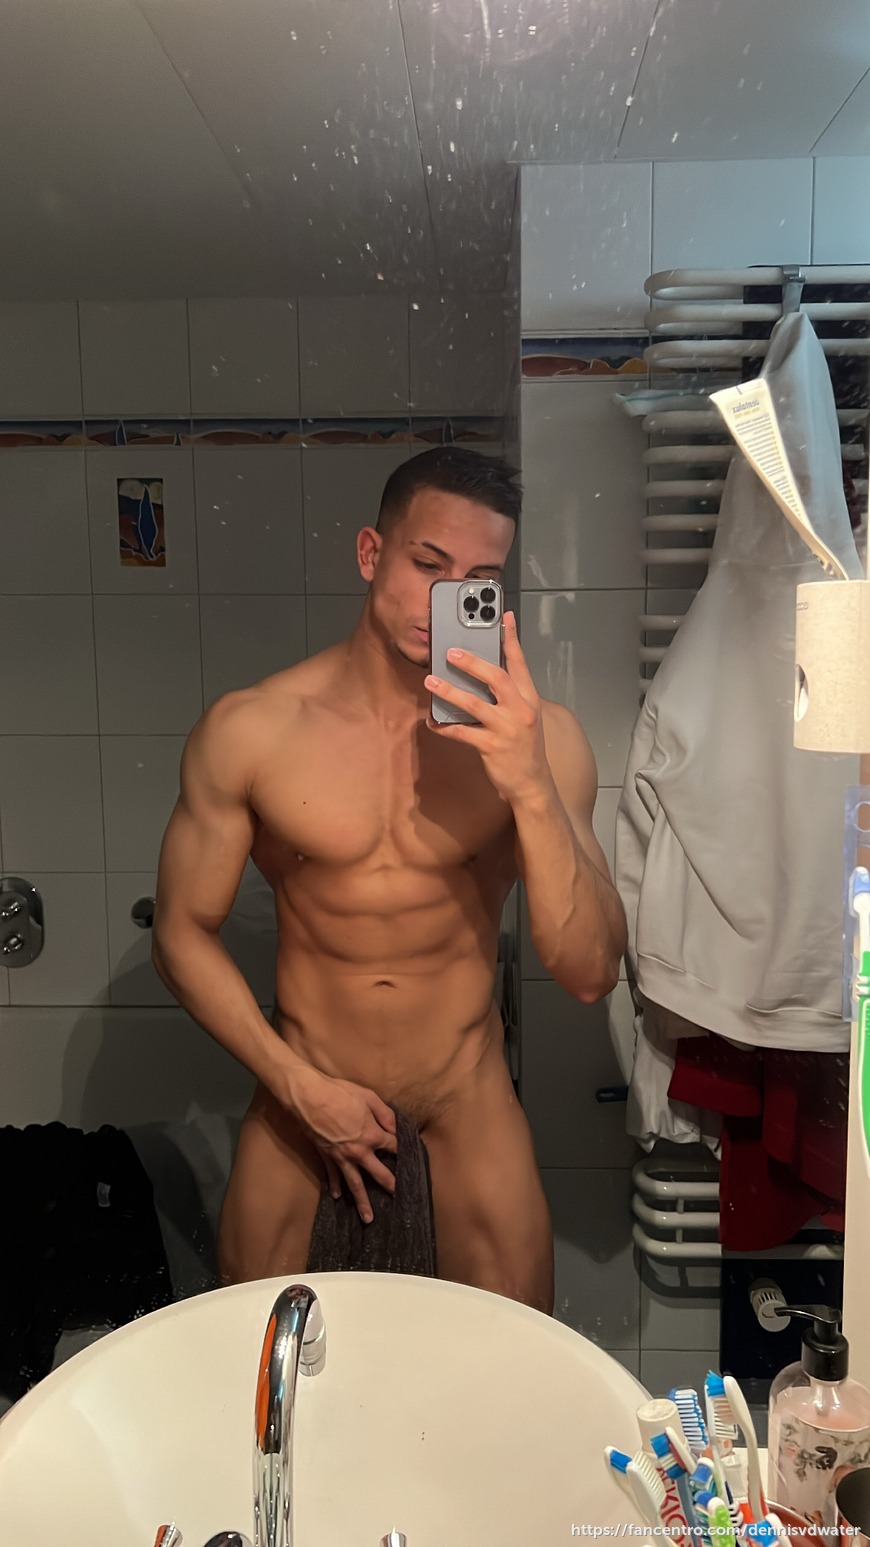 I wanna get naughty with you, baby! Follow me here and let's have some fun! 🖤 You can watch my content for followers and receive my naughty DMs. See you! xxx,  😈 Dennis 1